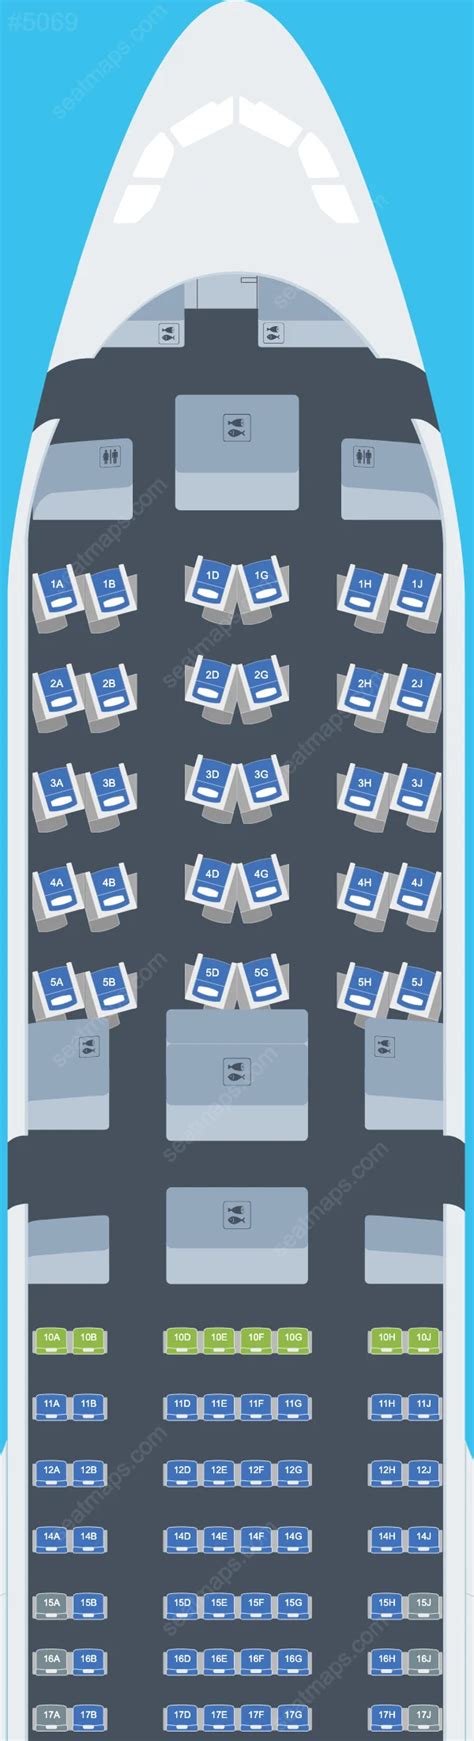 Klm Airbus A Seat Map Updated Find The Best Seat Seatmaps Hot